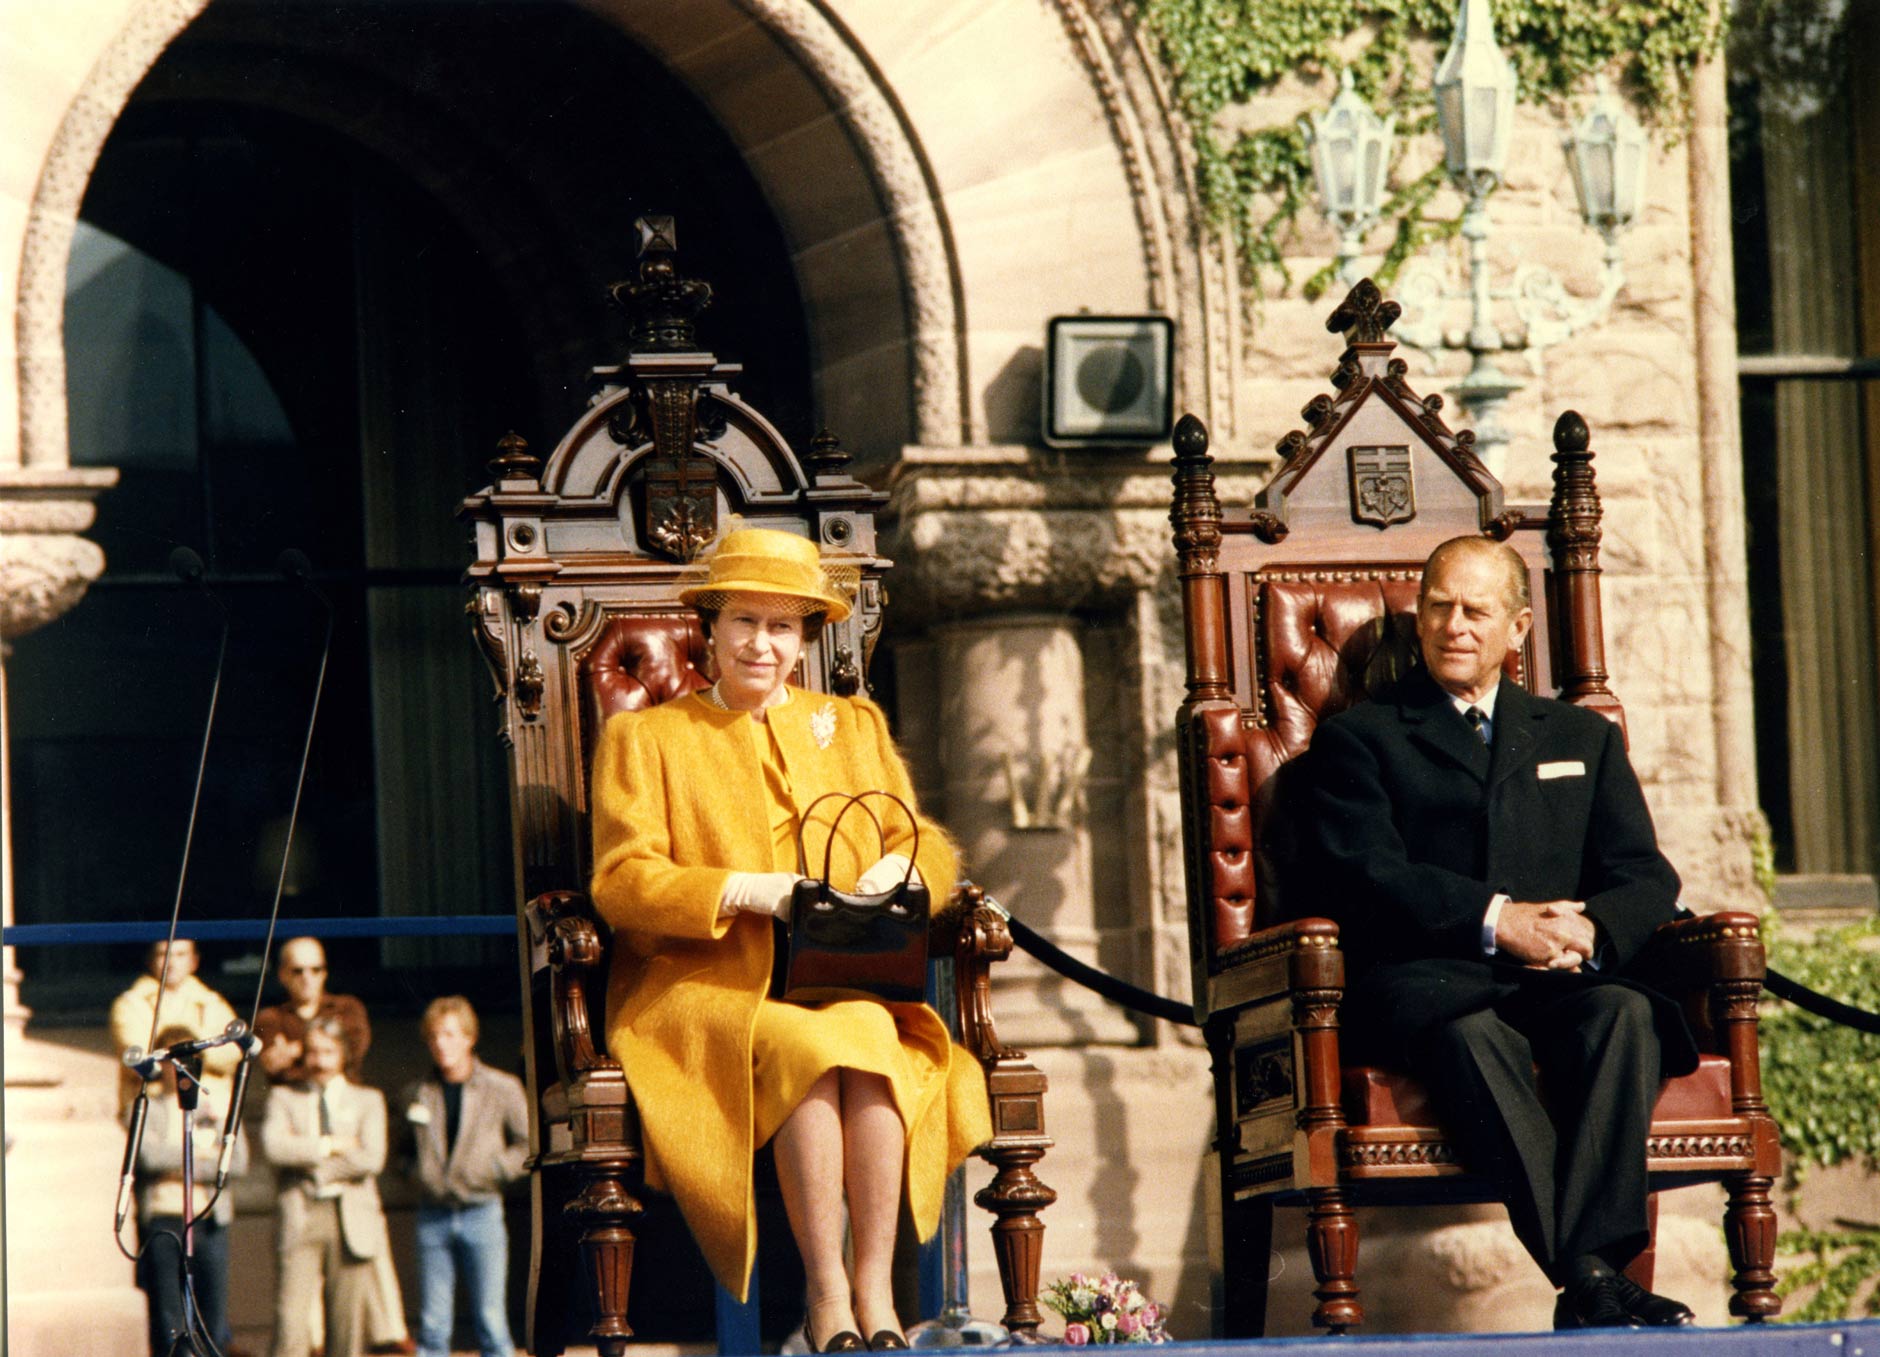 Her Majesty Queen Elizabeth II seated next to His Royal Highness The Duke of Edinburgh during a 1984 visit to Ontario's Legislature.